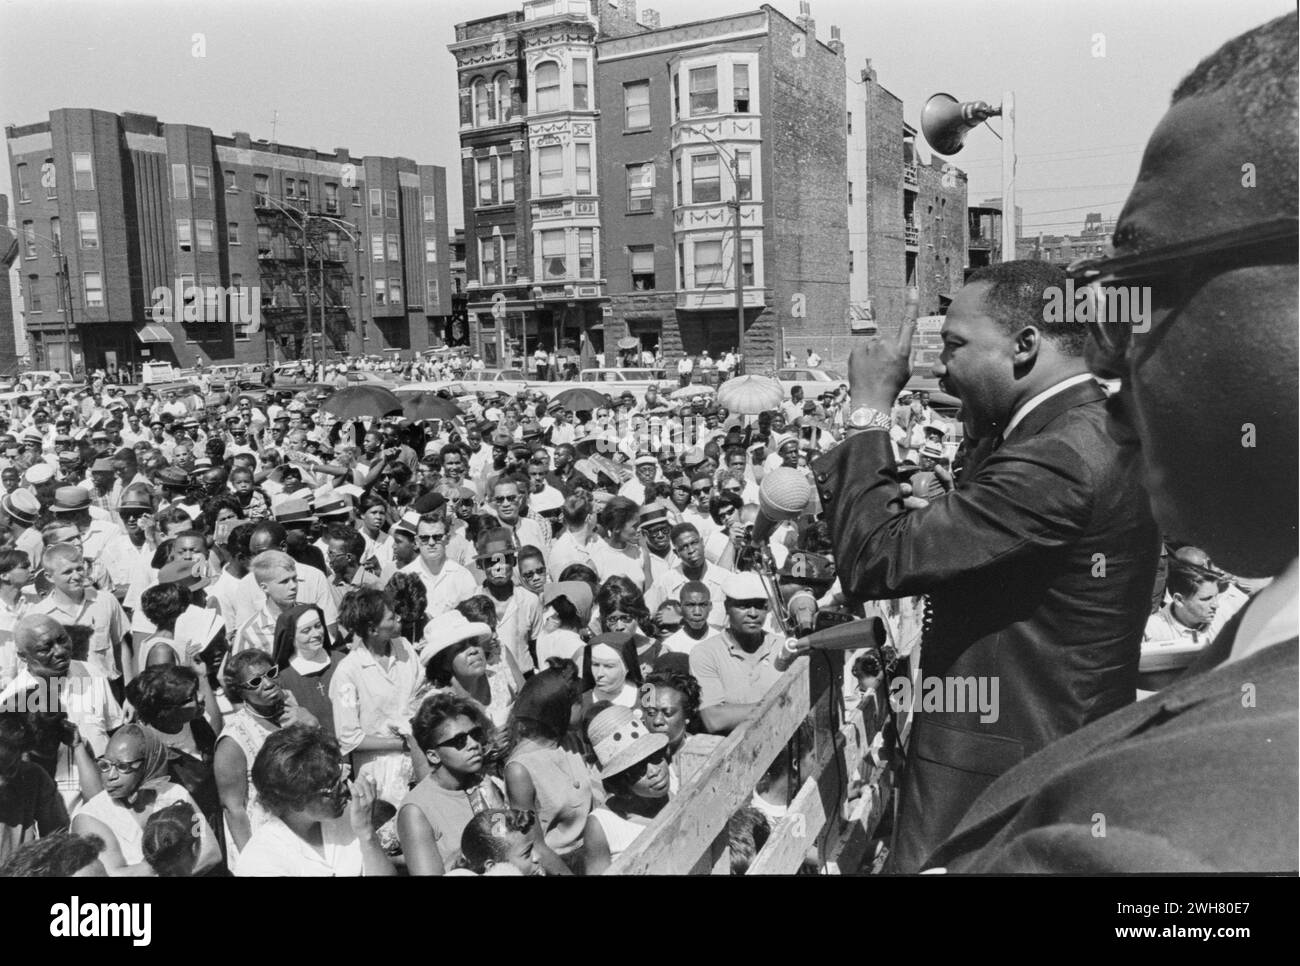 Dr King Speaking to Crowd During a Peaceful Civil Rights Protest in the 1960s in Chicago Stock Photo